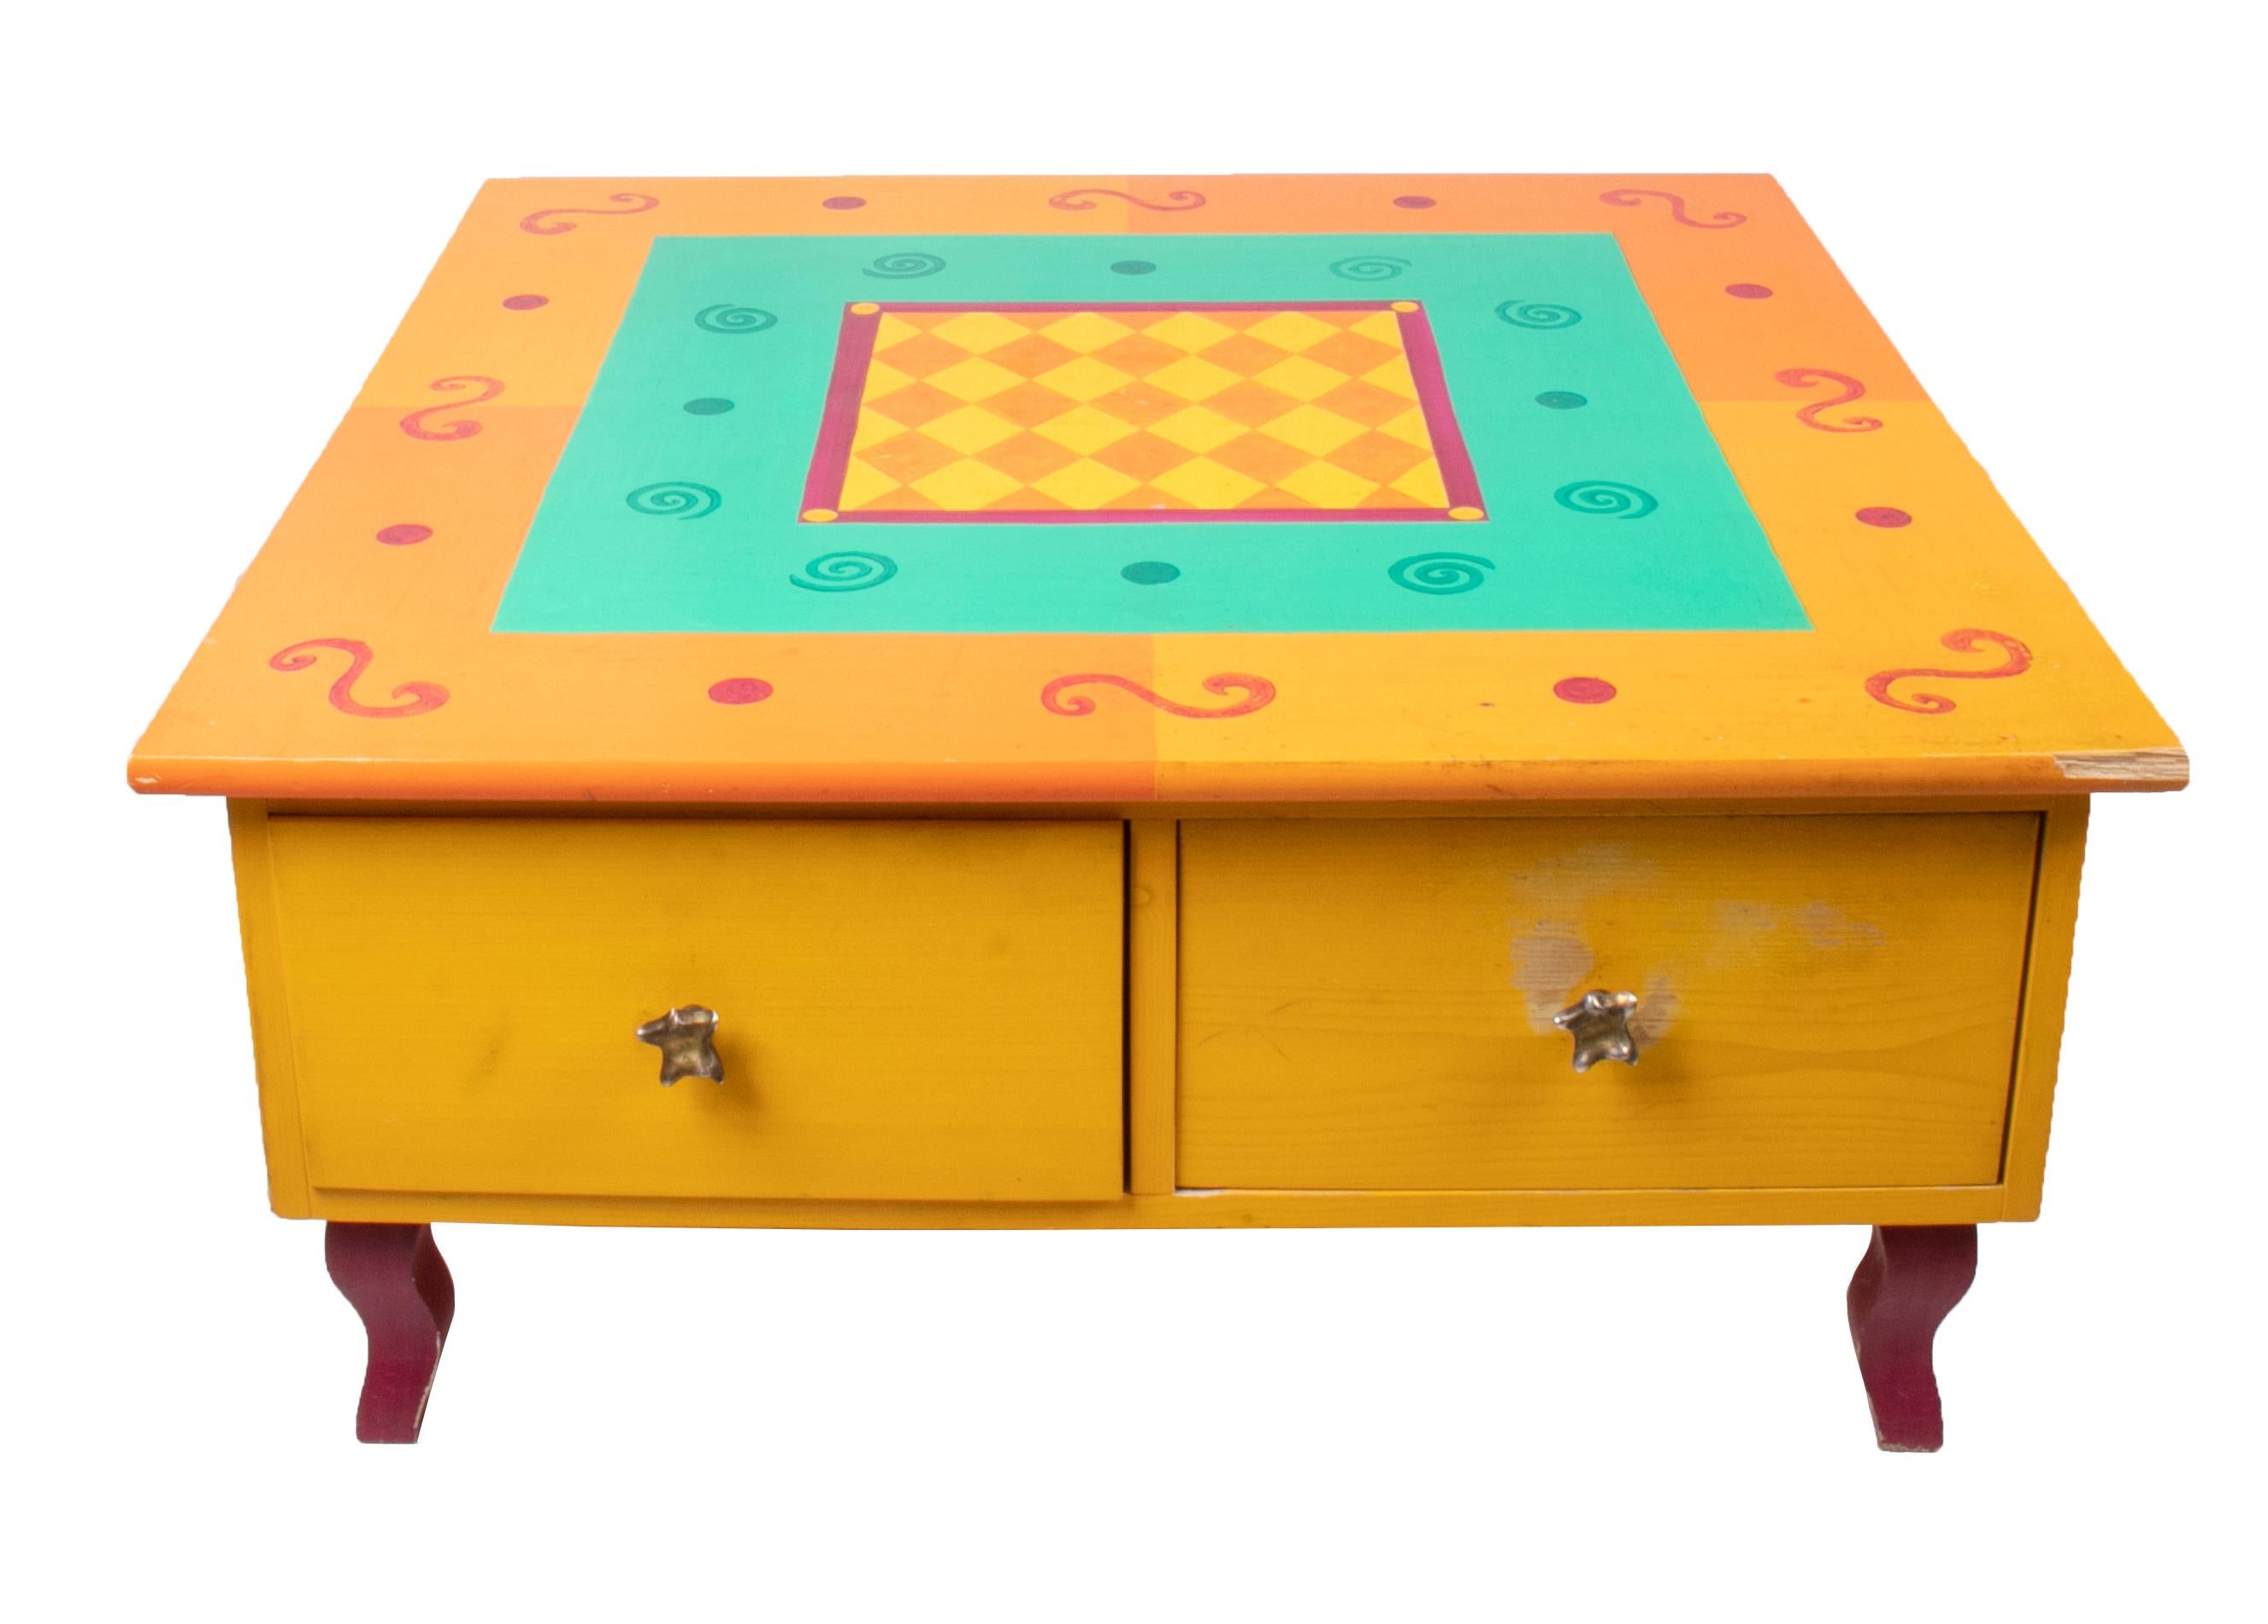 1980s German yellow coffee table with drawers.